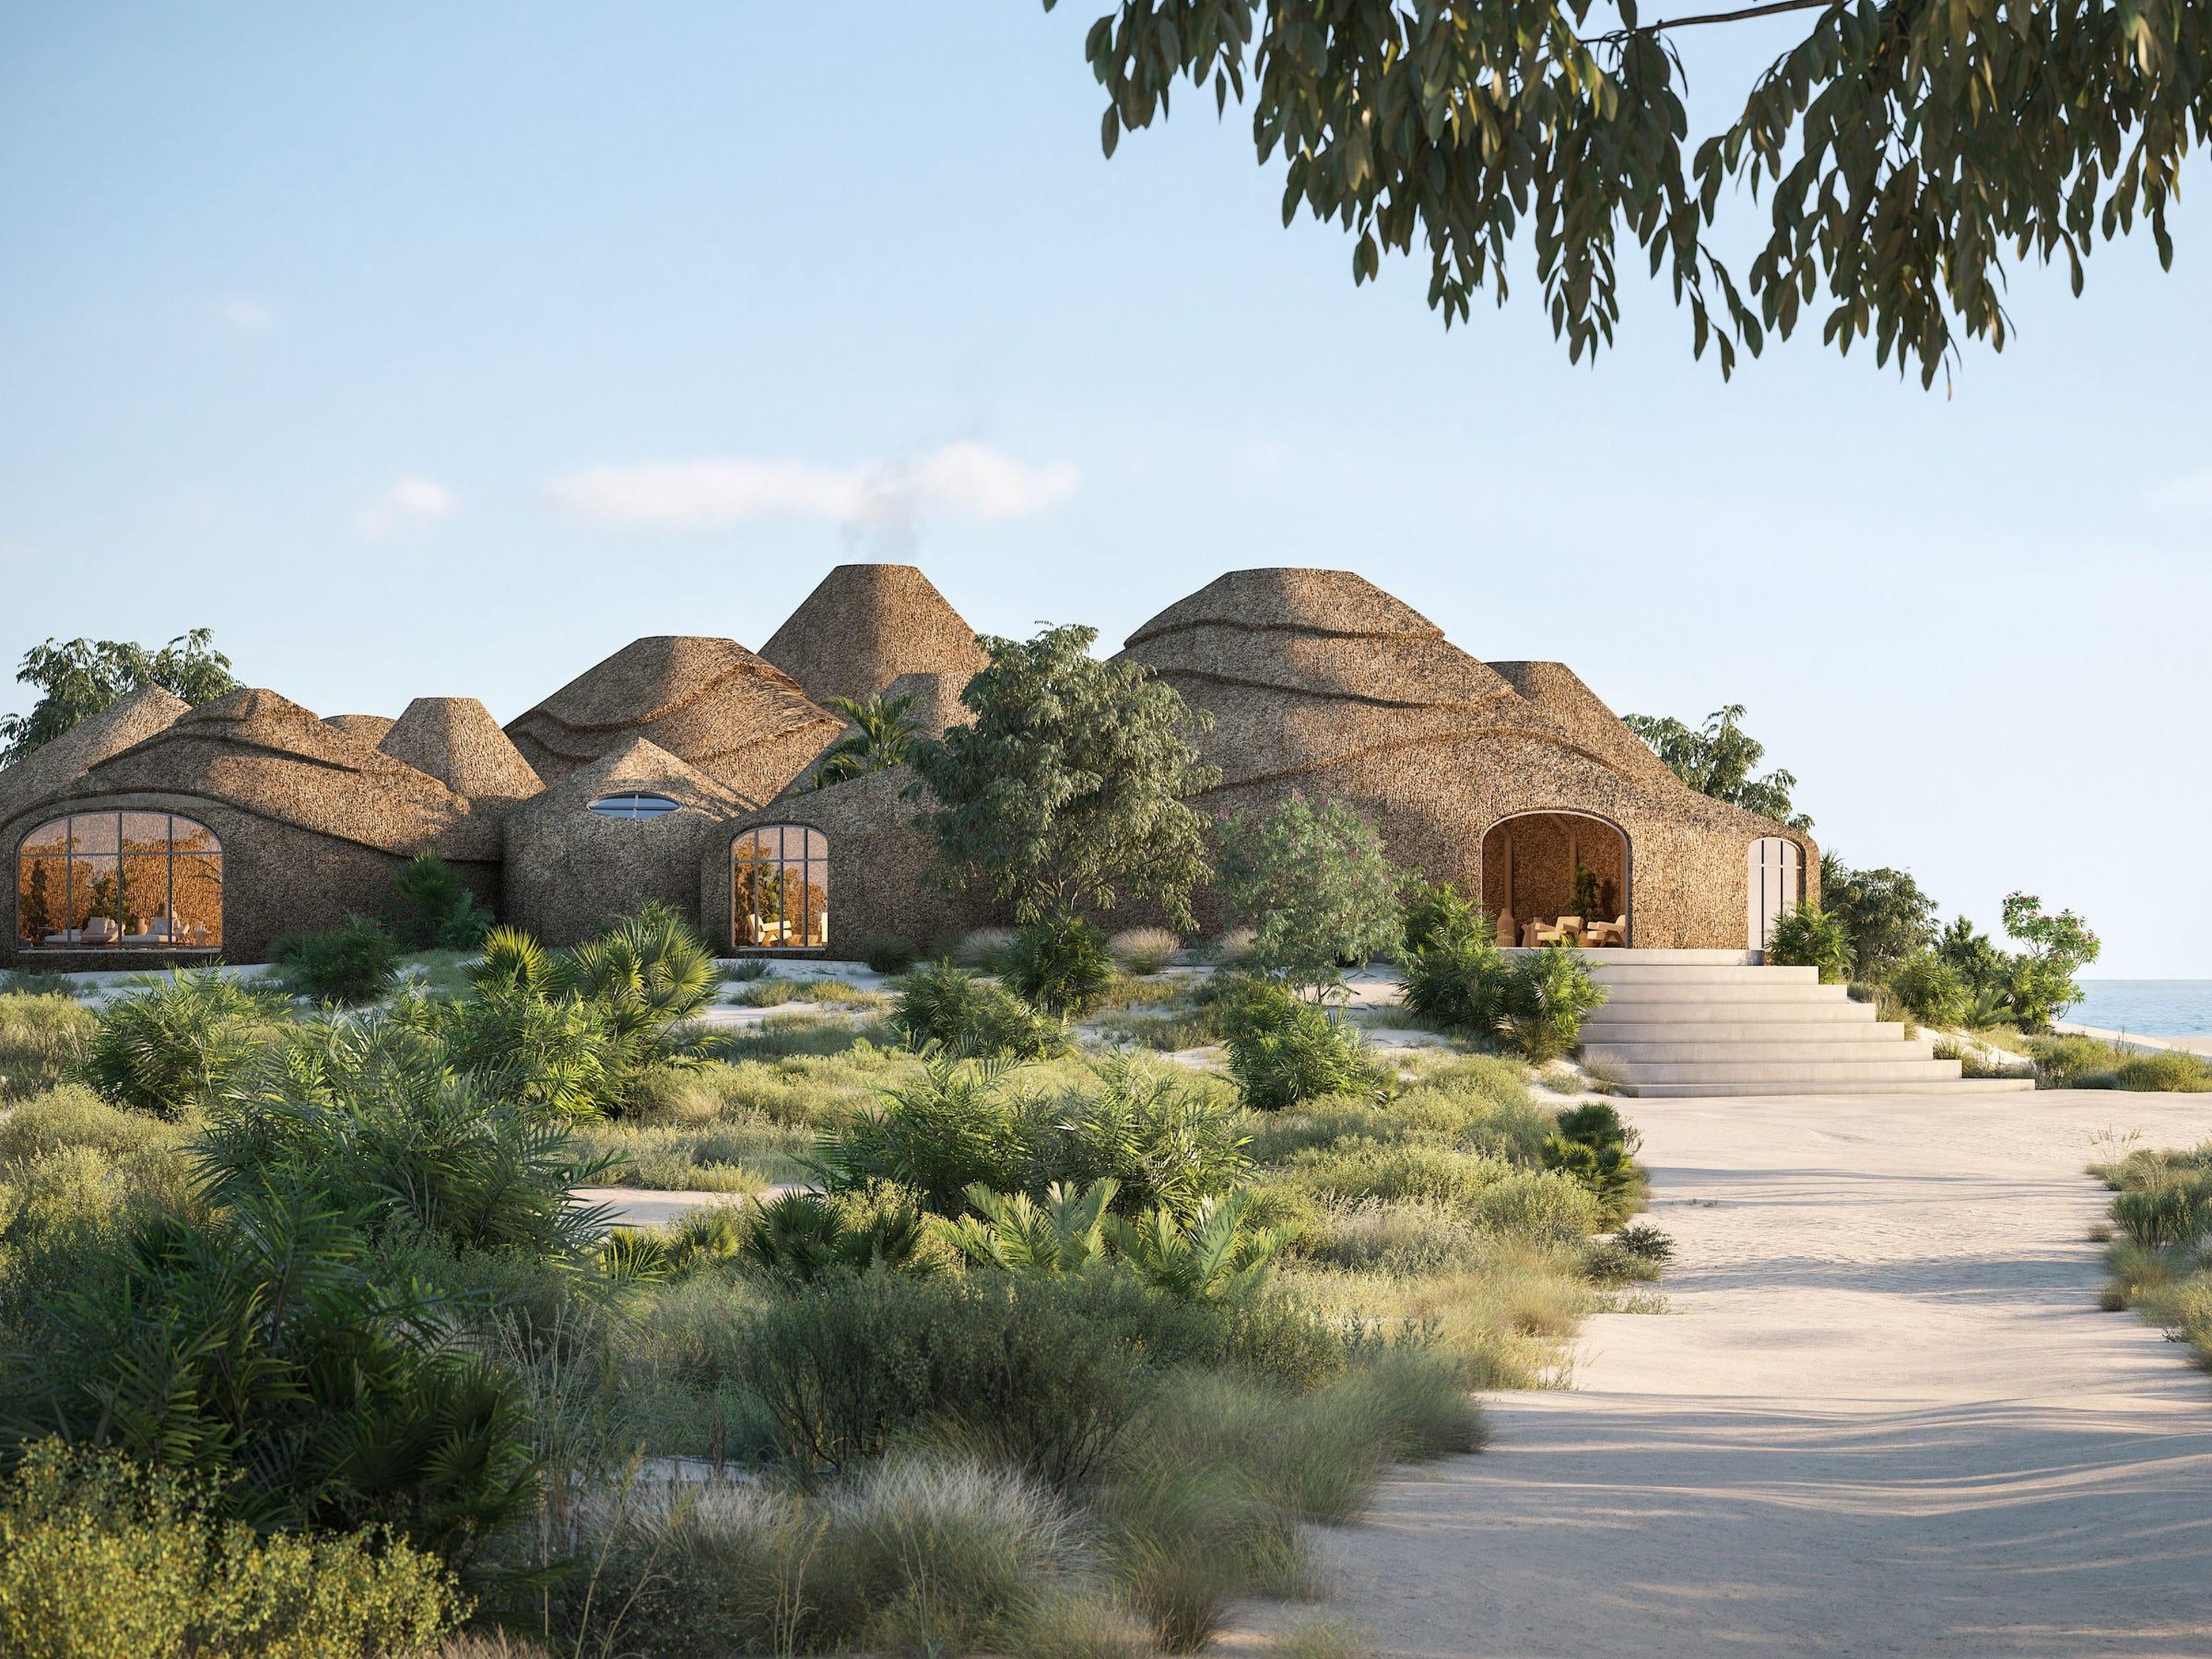 The building materials for the resort are made from the island's sand and saltwater to make a sand-based mortar.